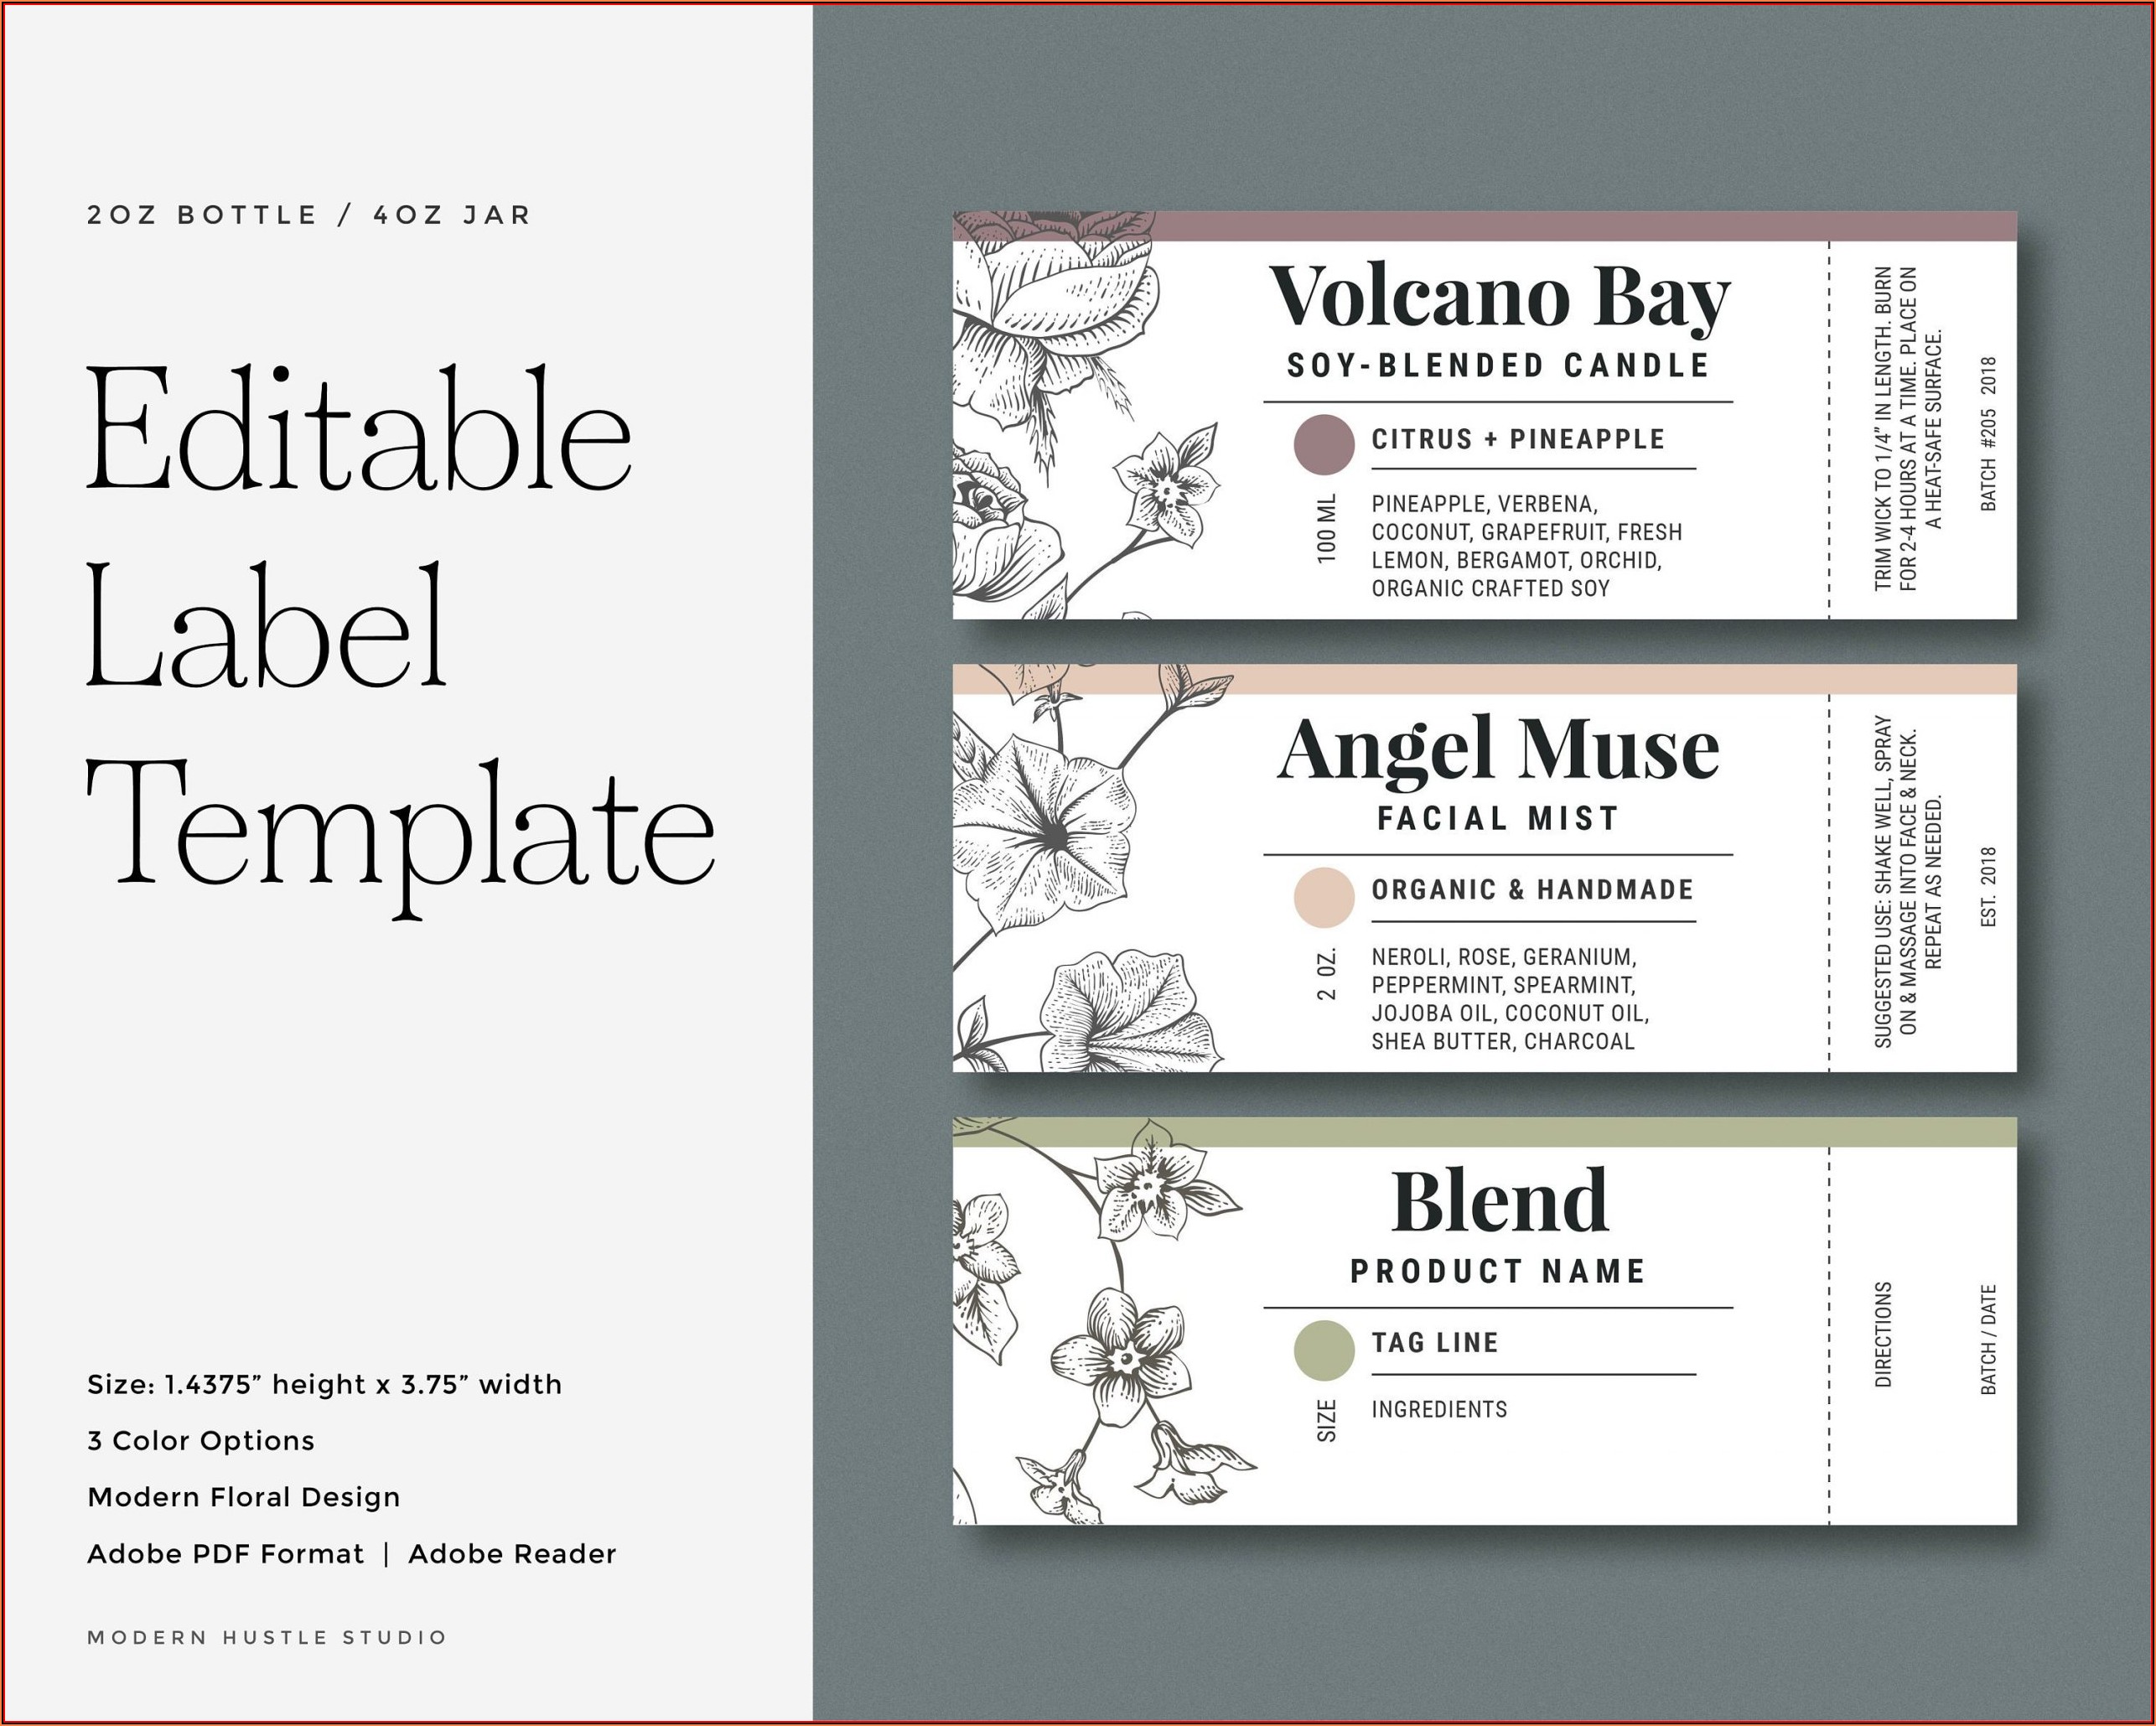 Avery Label Printing Templates